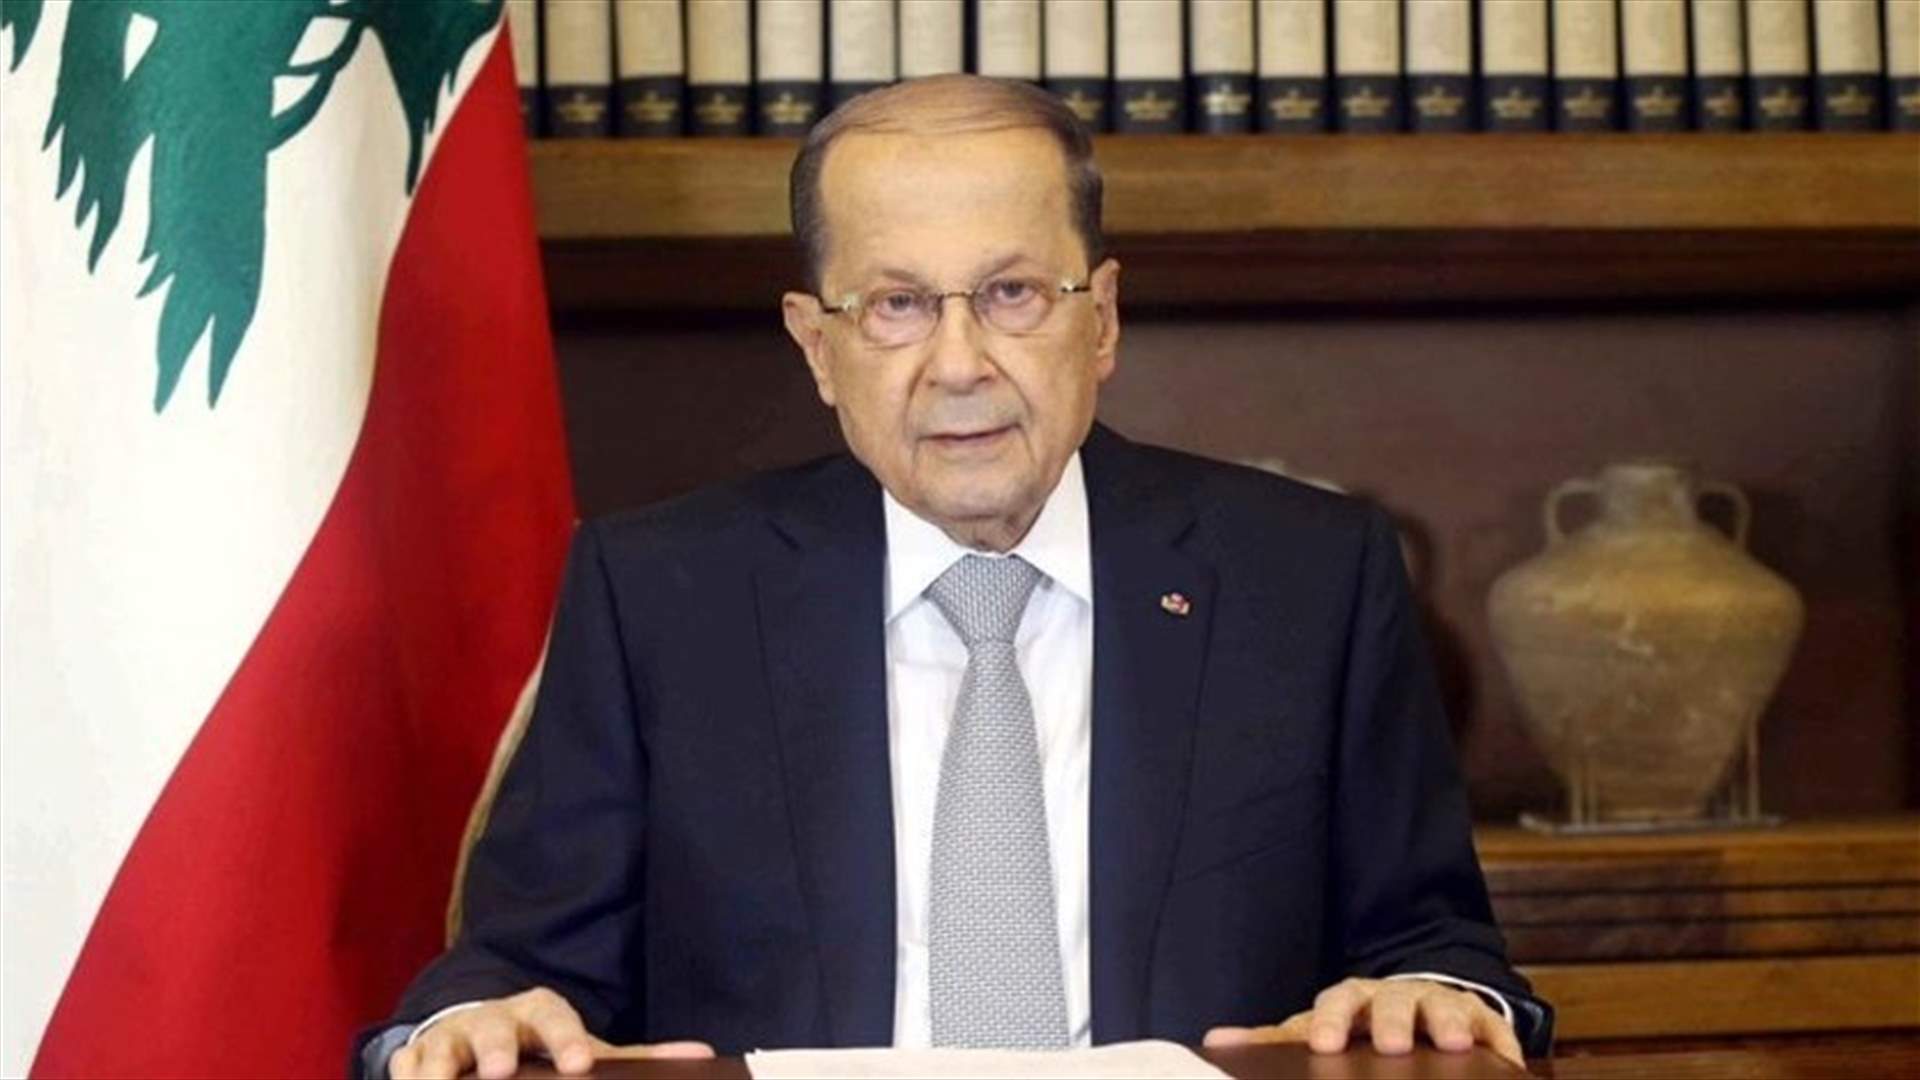 President Aoun on US Treasury decision: Lebanon regrets US measures, to follow up with US authorities